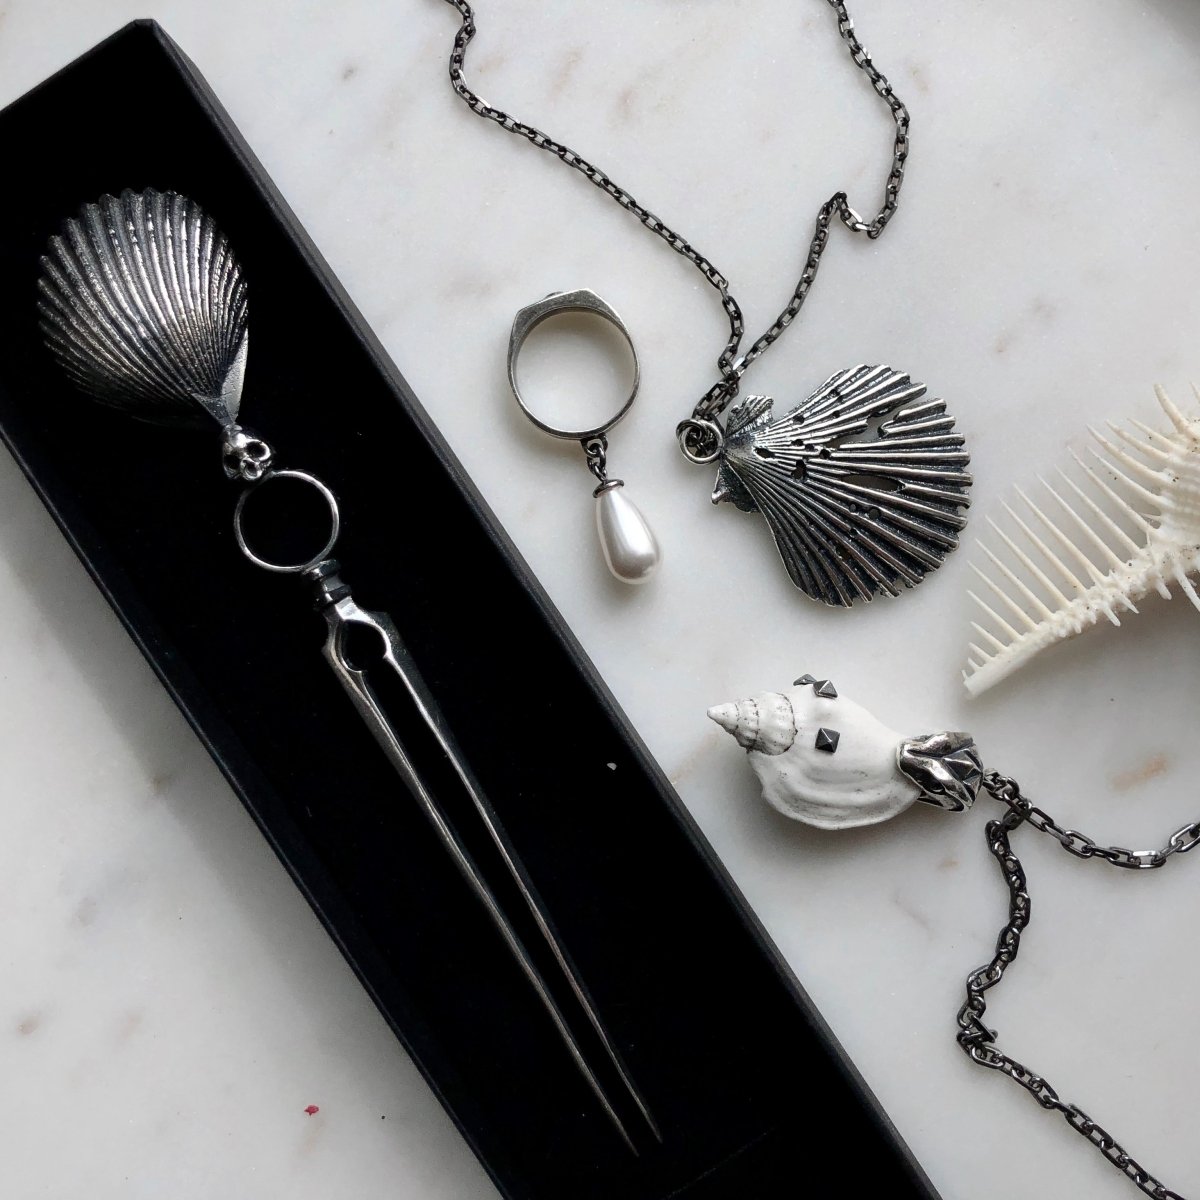 SHELL HAIRPIN - Macabre Gadgets Store